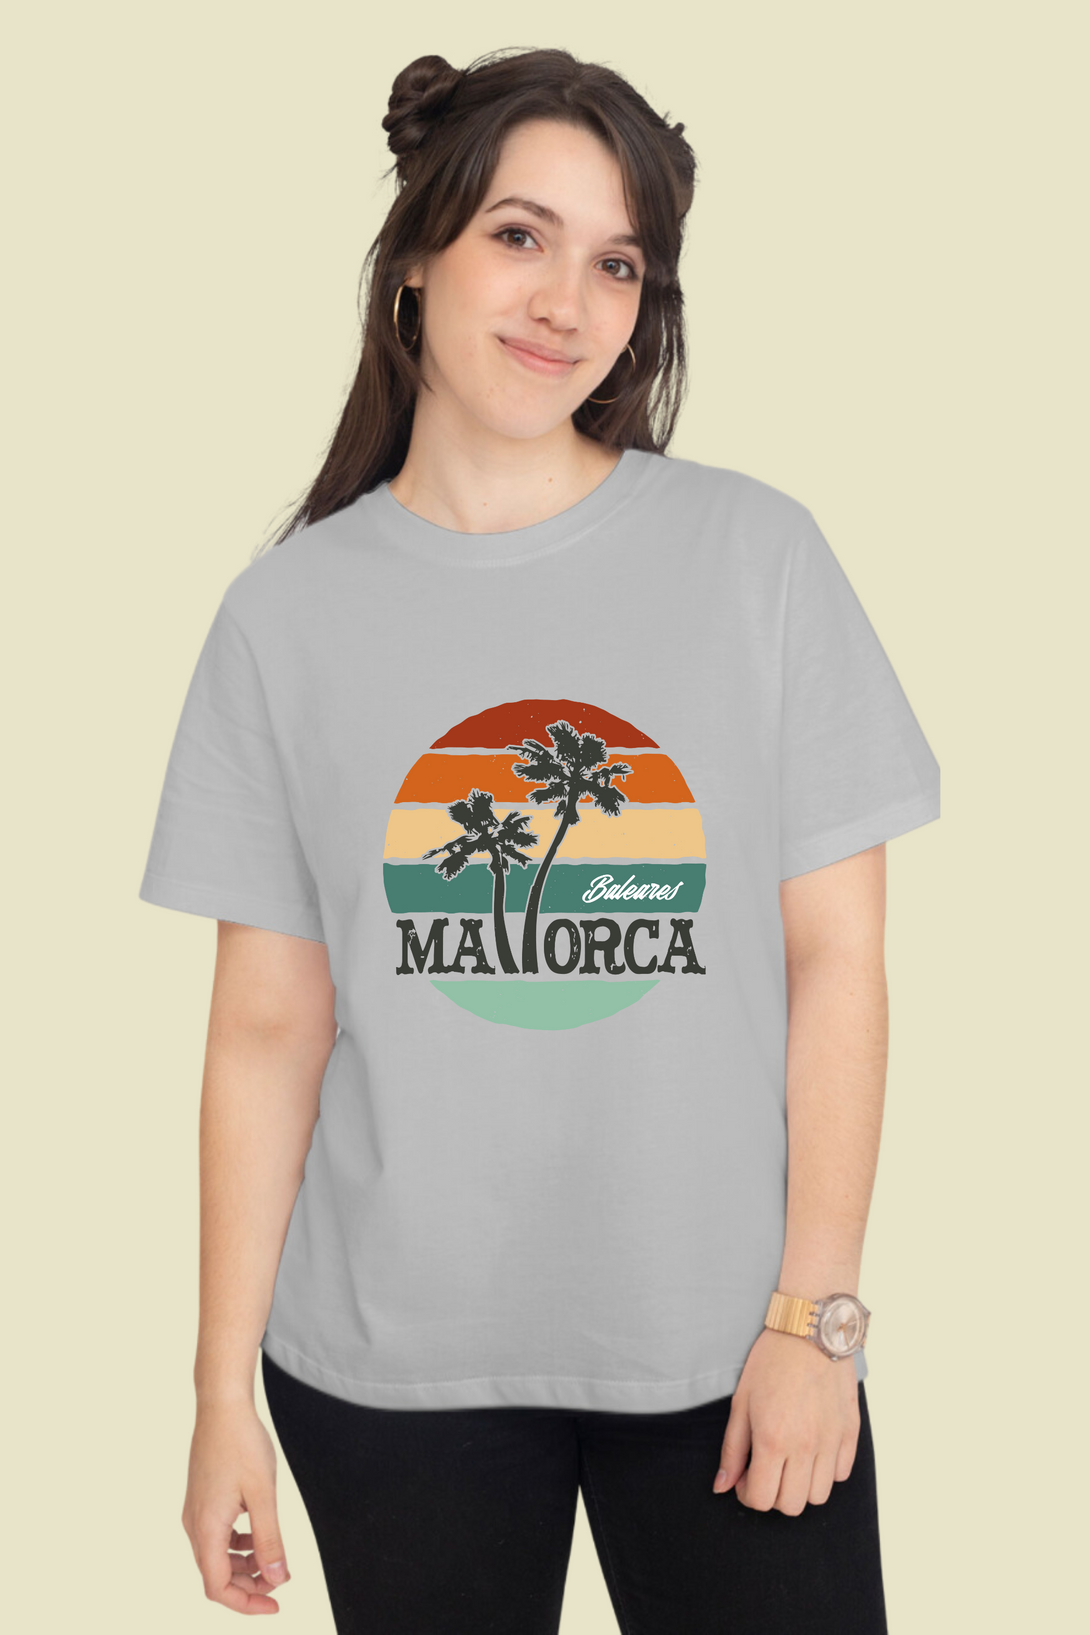 Mallorca And Palm Printed T-Shirt For Women - WowWaves - 9